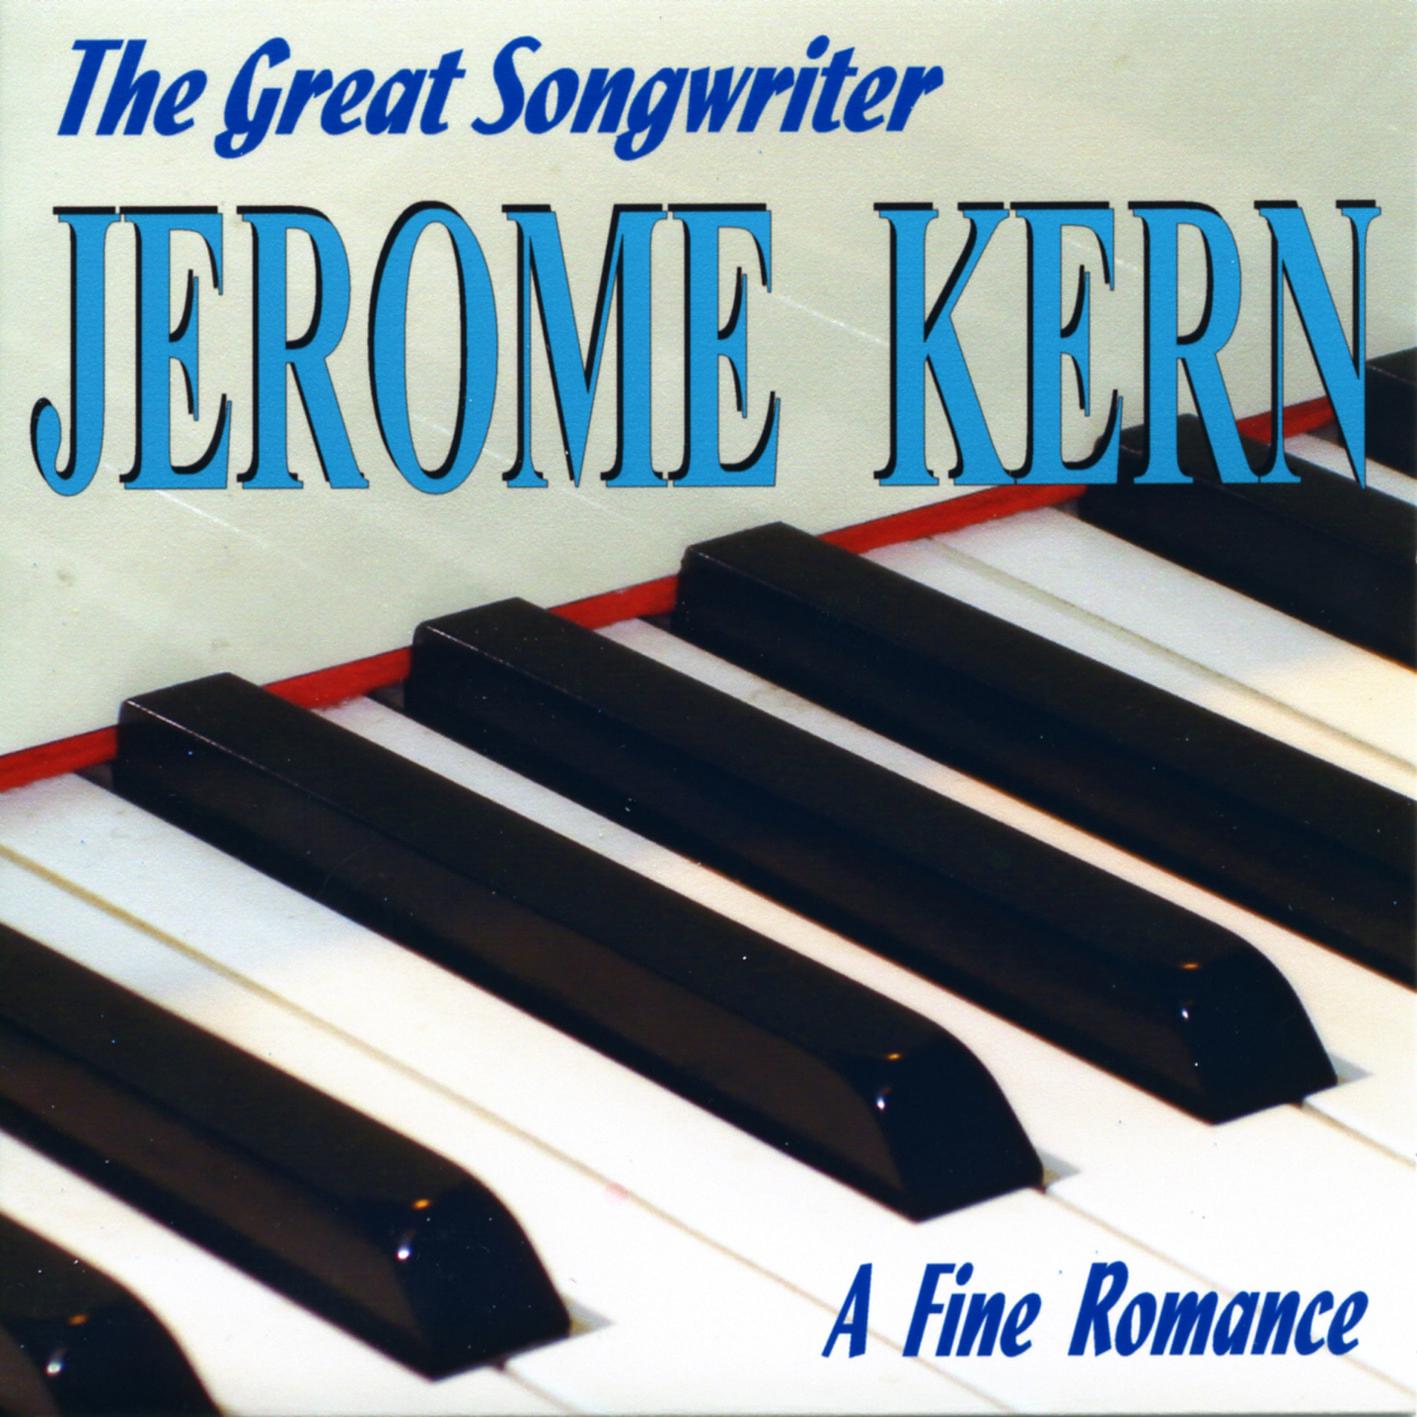 The Great Songwriter Jerome Kern - A Fine Romance